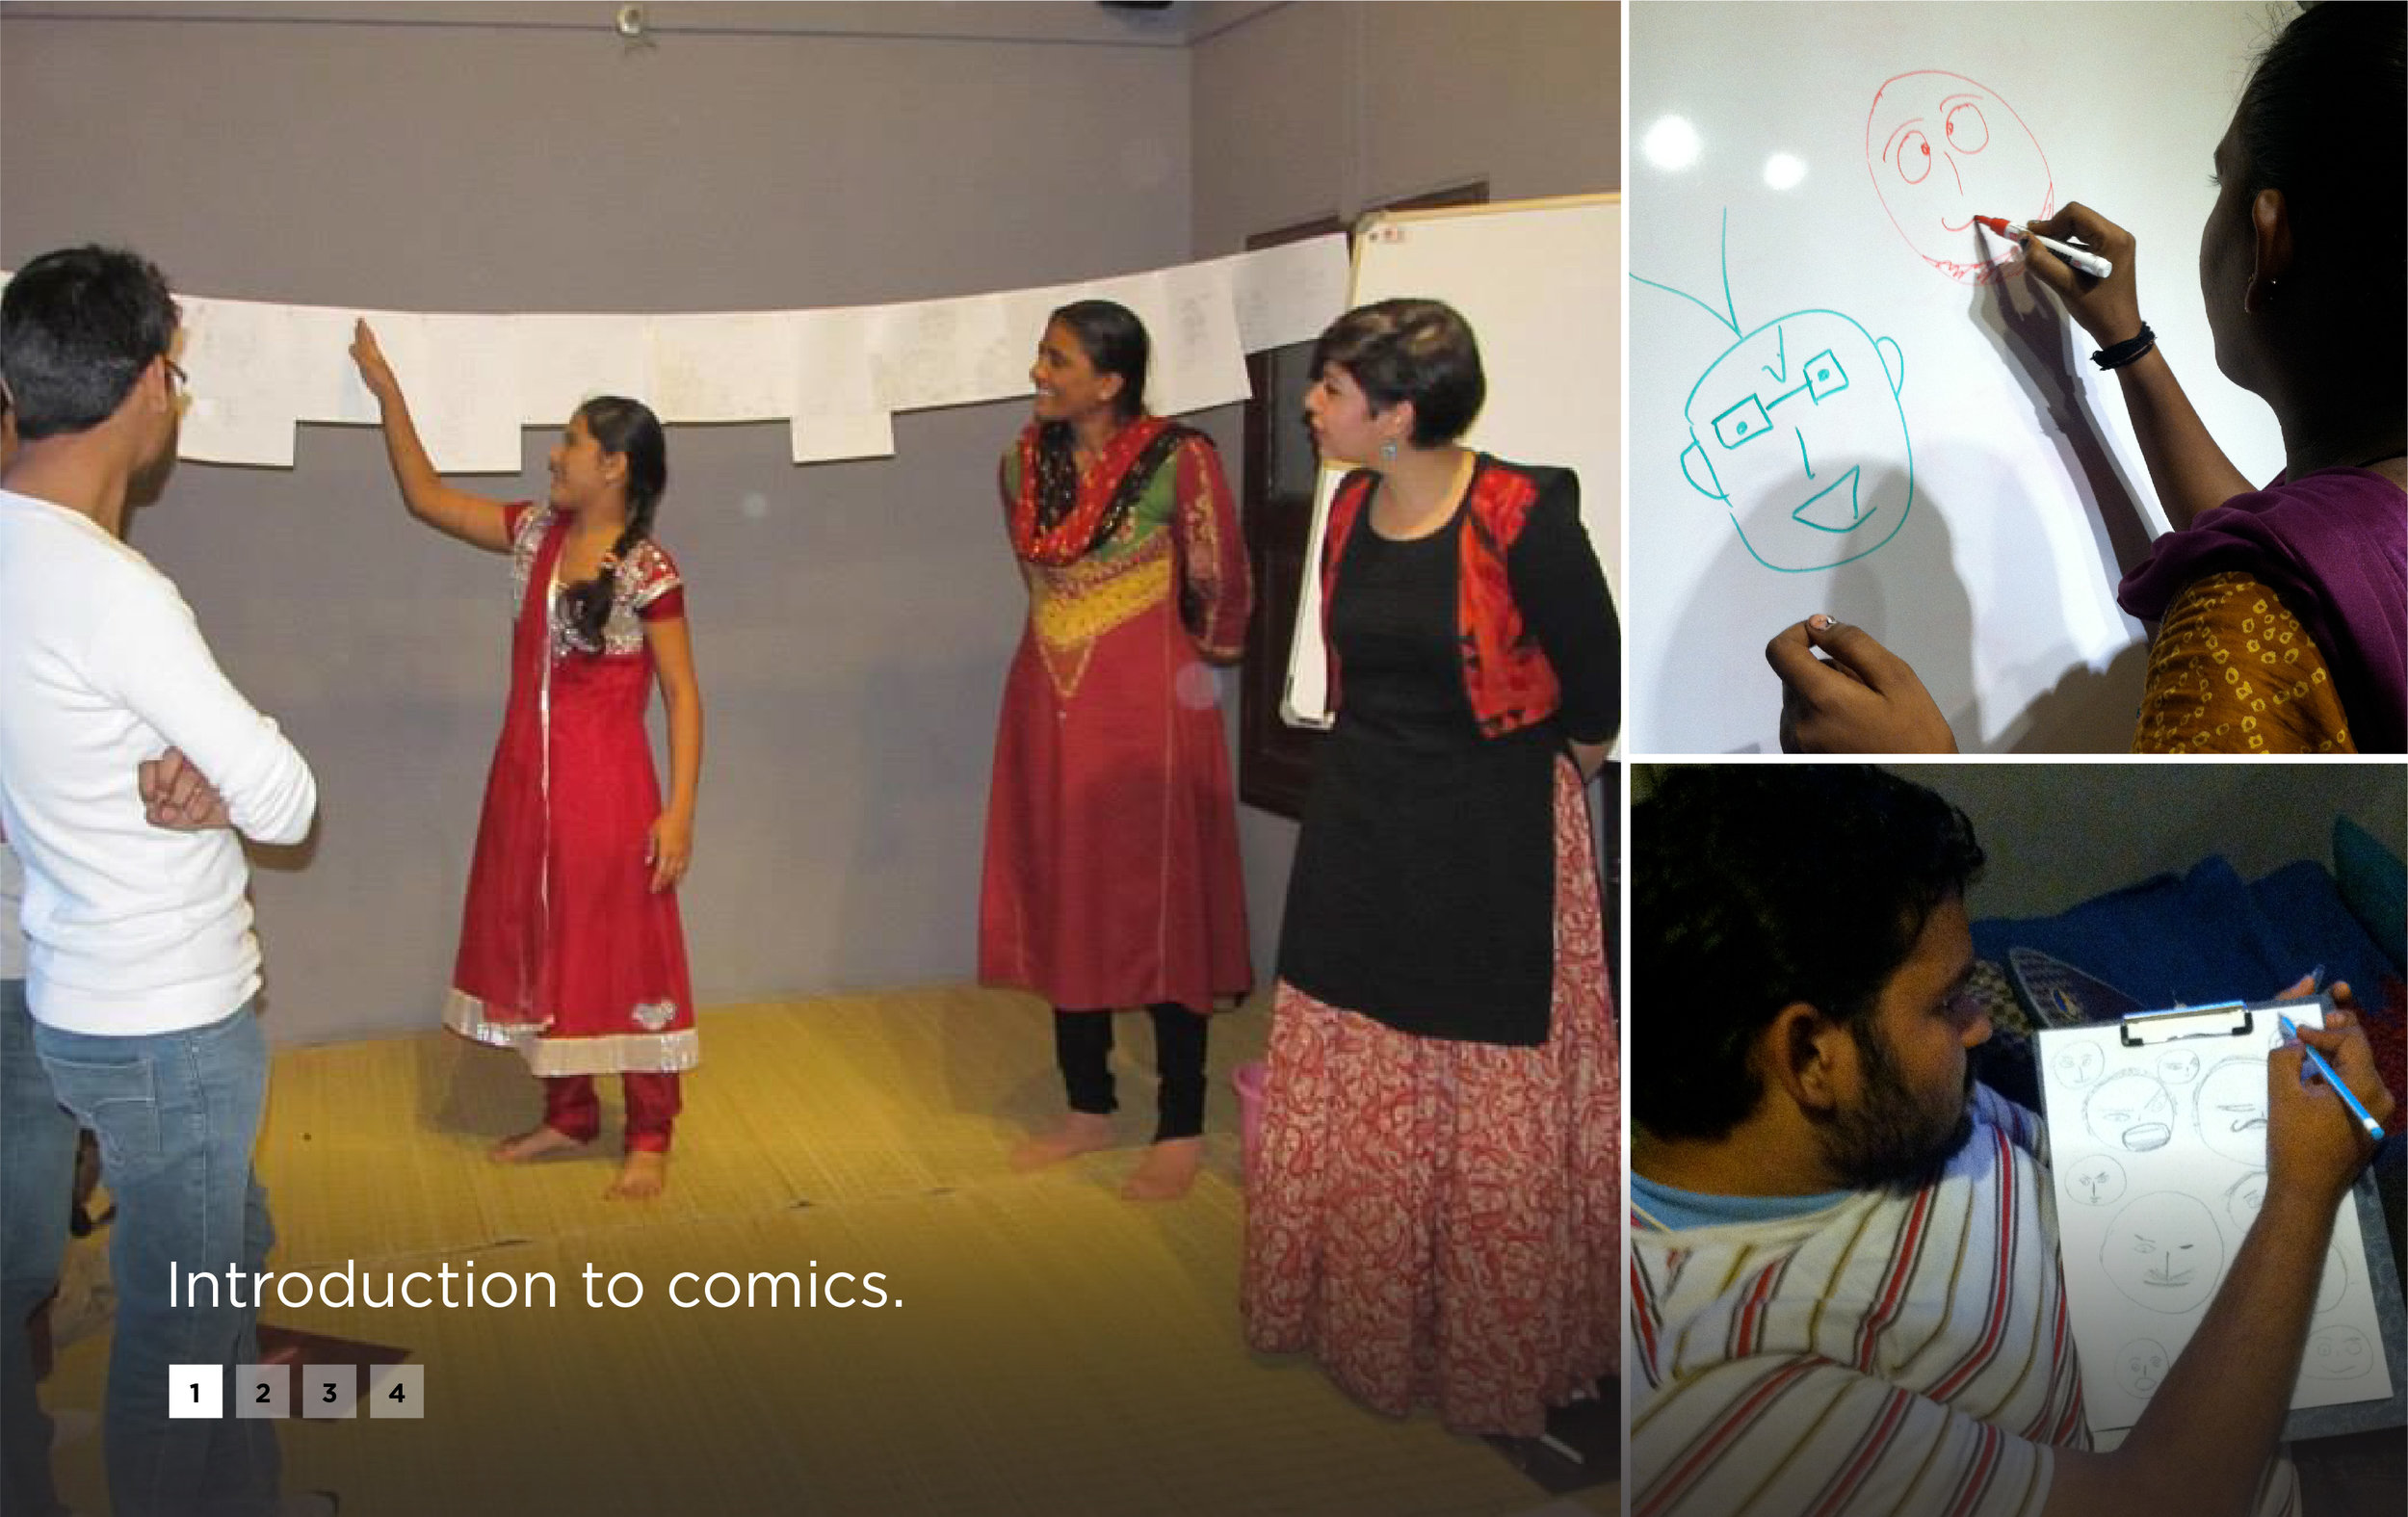 Day one of the workshop equipped participants with the basics of drawing for comics.